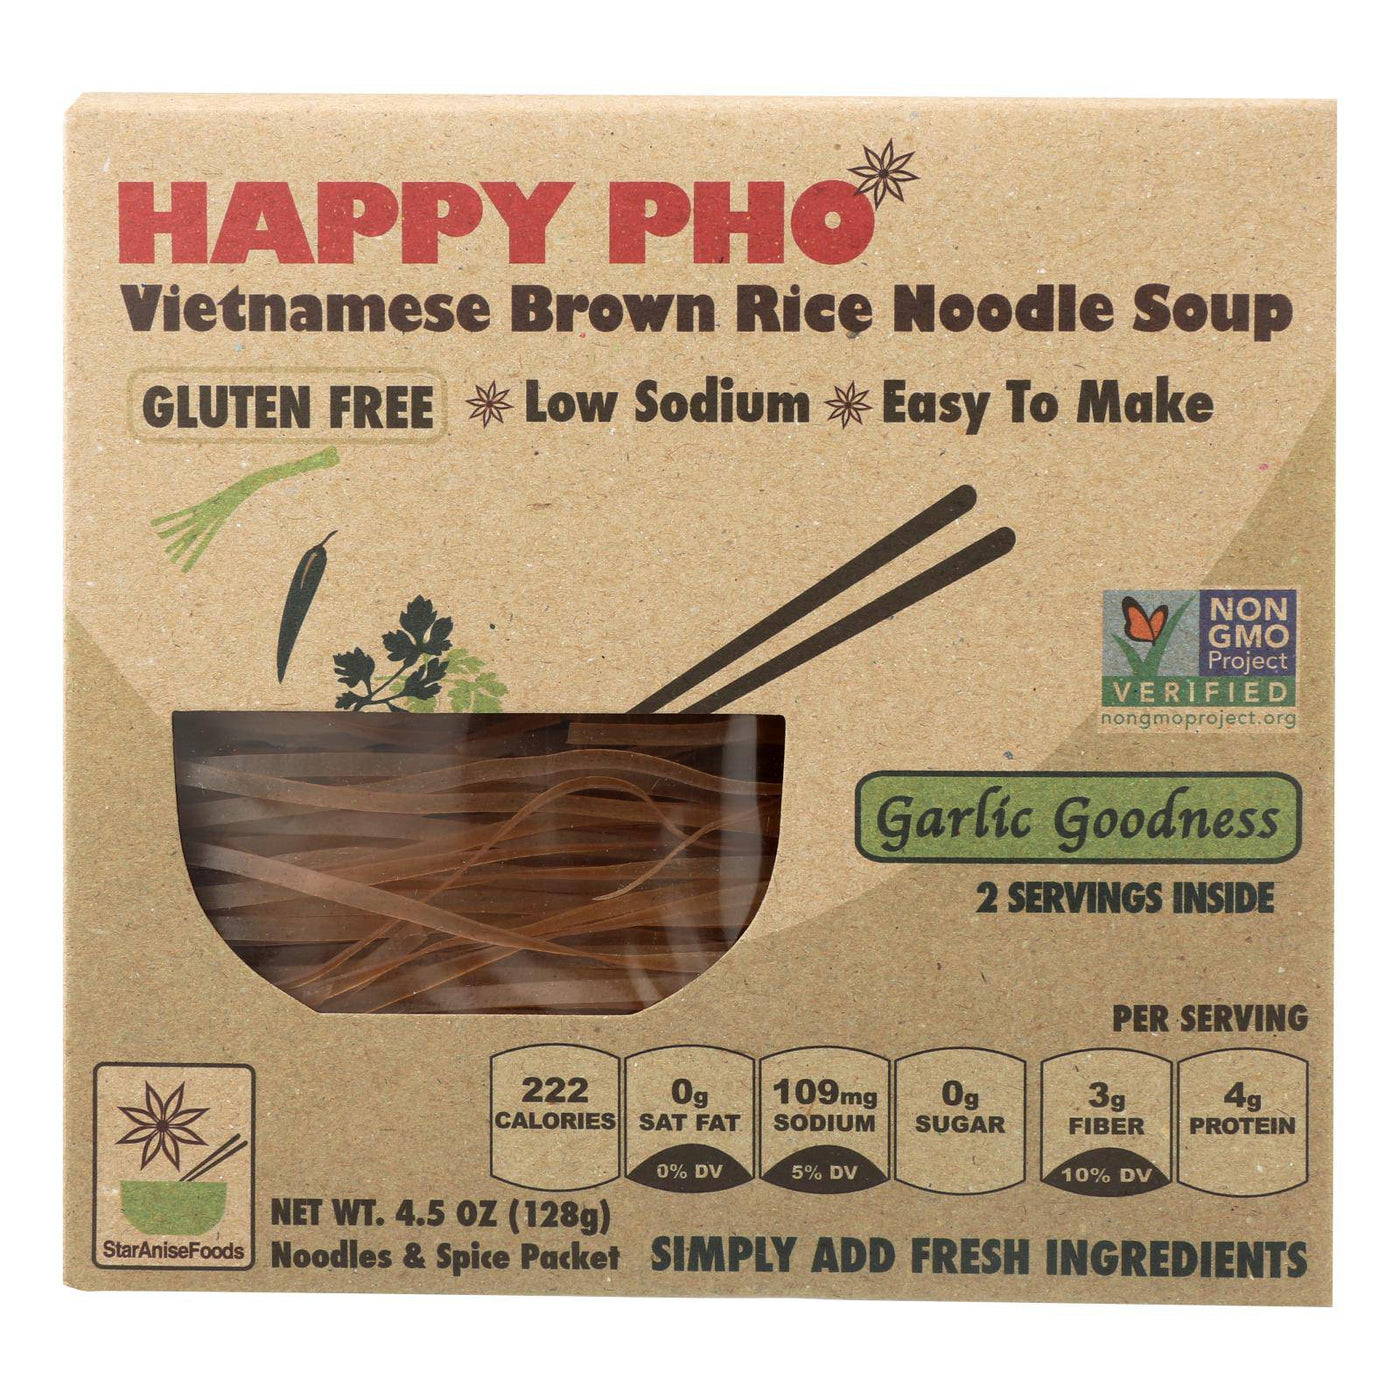 Buy Happy Pho Brown Rice Noodle Soup Mix, Garlic Goodness  - Case Of 6 - 4.5 Oz  at OnlyNaturals.us